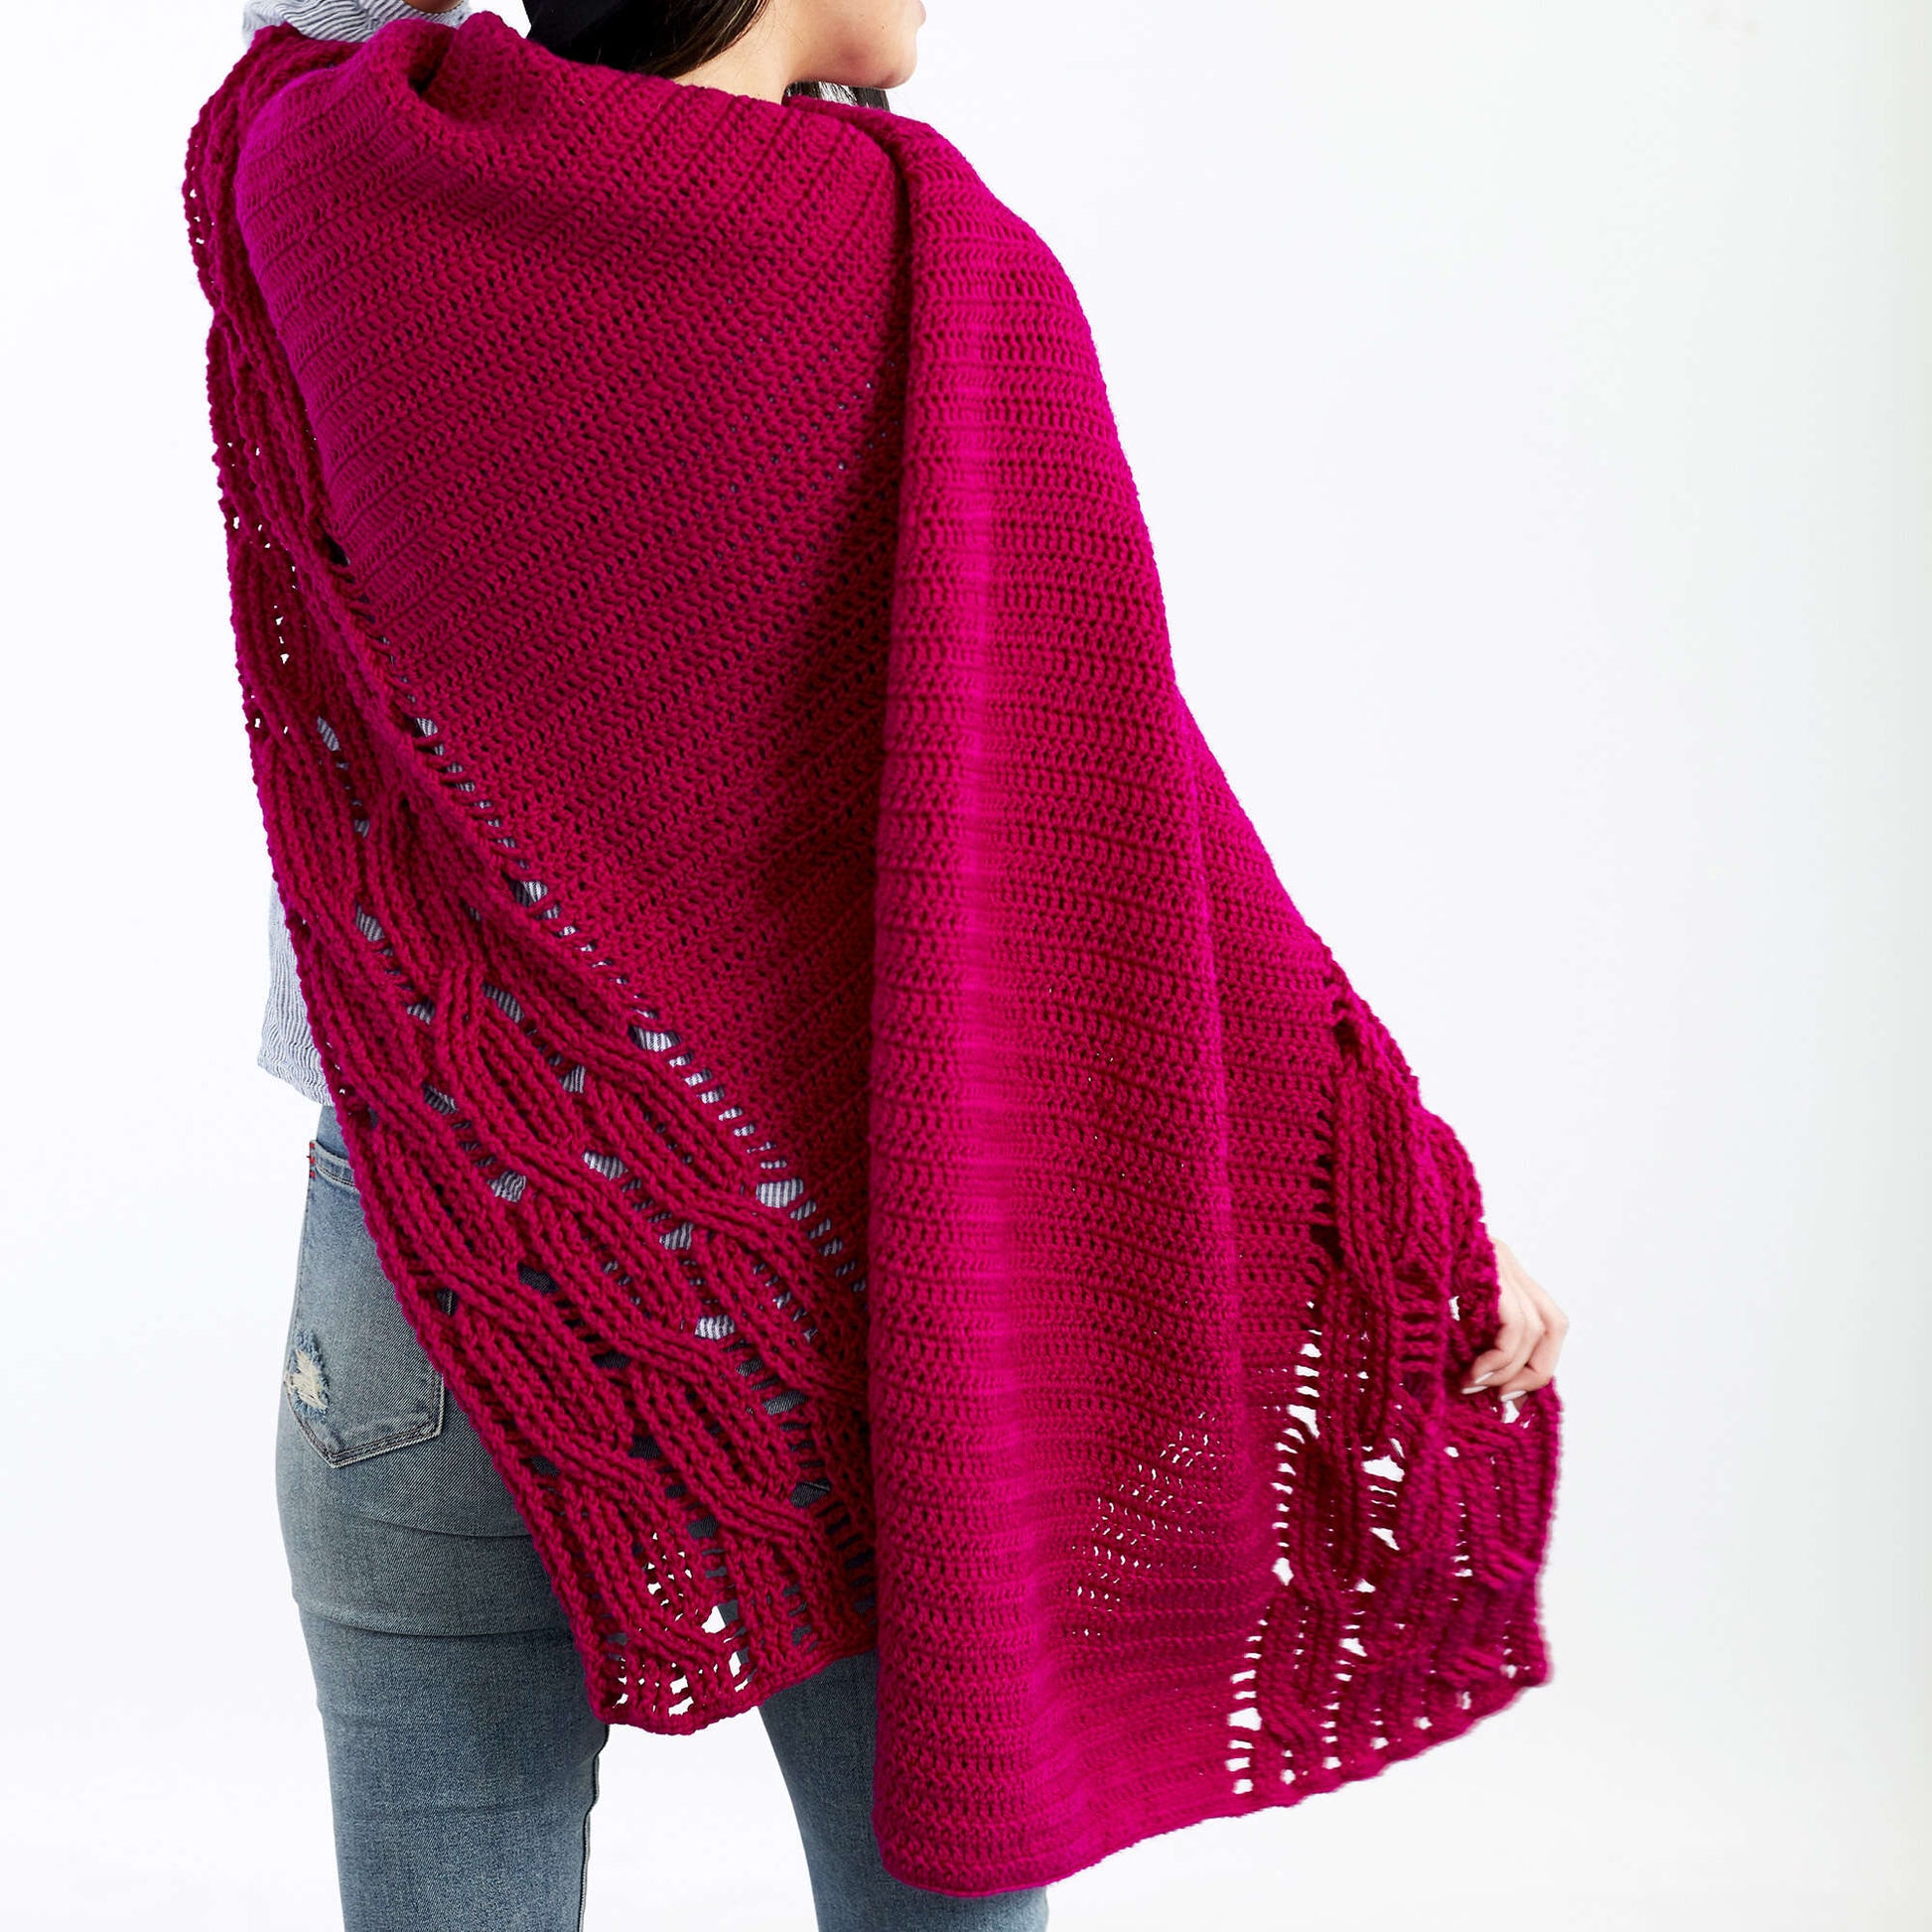 Red Heart Interwoven Cabled Chic Shawl Red Heart Interwoven Cabled Chic Shawl